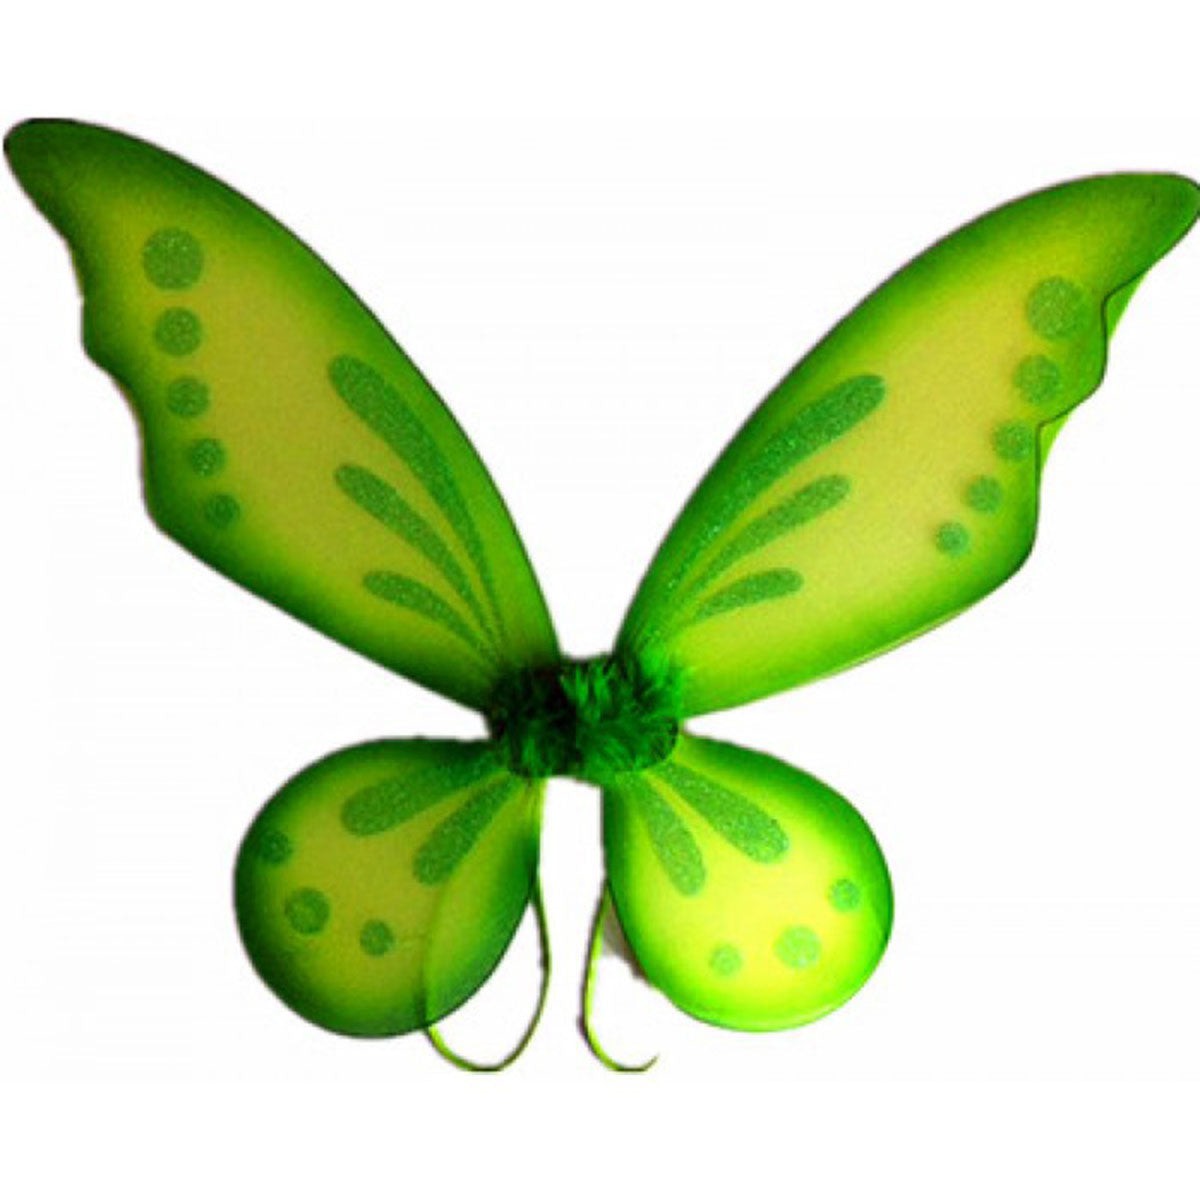 IVY TRADING INC. Costume Accessories Green Twinkle Fairy Wings for Kids 8336052261307